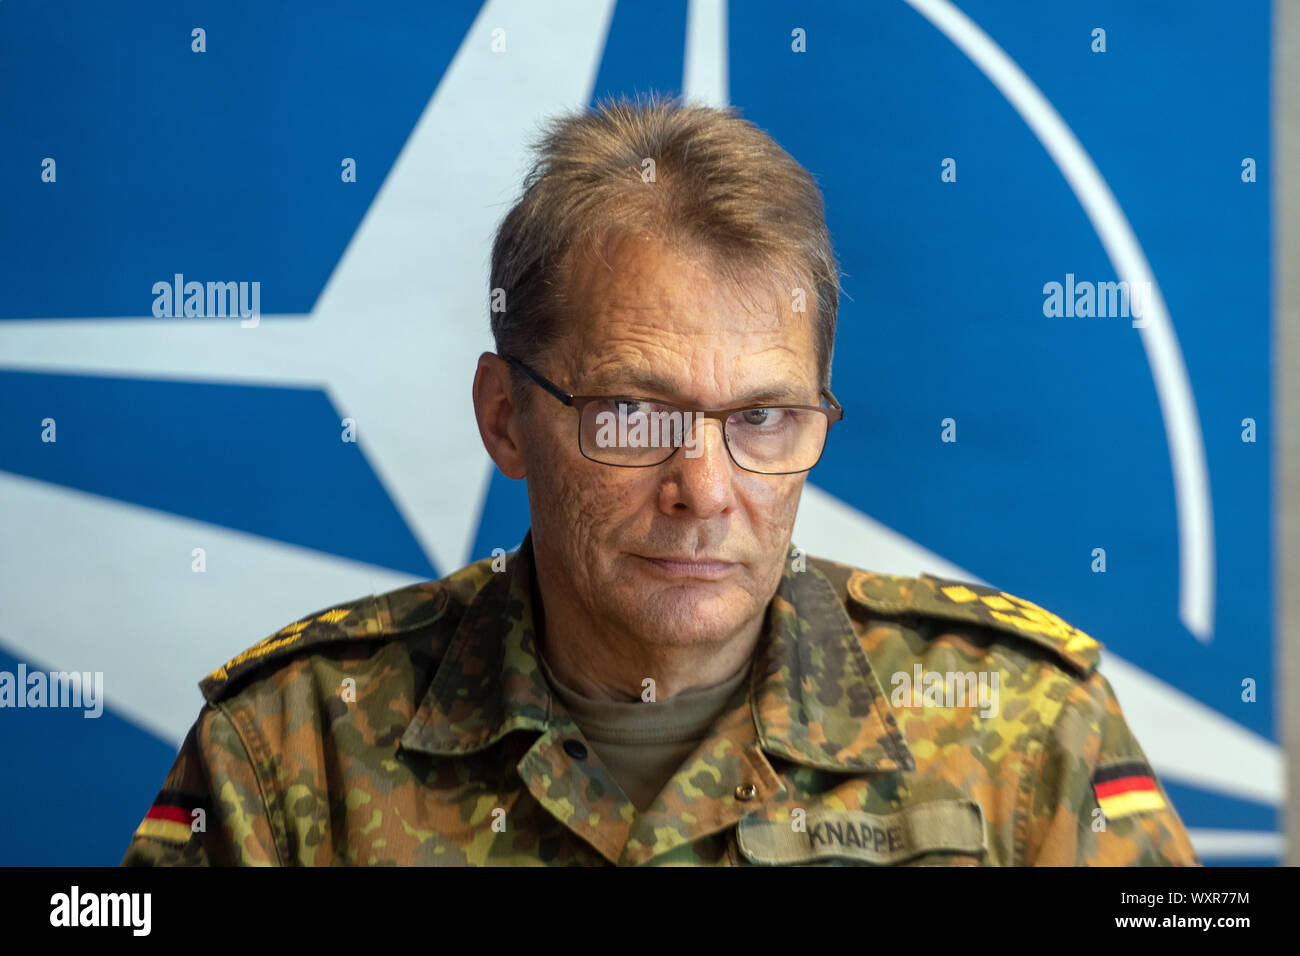 Ulm, Germany. 17th Sep, 2019. The commander of the Ulm command, Lieutenant General Jürgen Knappe, sits in front of the NATO logo. At a two-day meeting, representatives of the NATO States discussed the establishment of the NATO Joint Support and Enabling Command (JSEC). Credit: Stefan Puchner/dpa/Alamy Live News Stock Photo